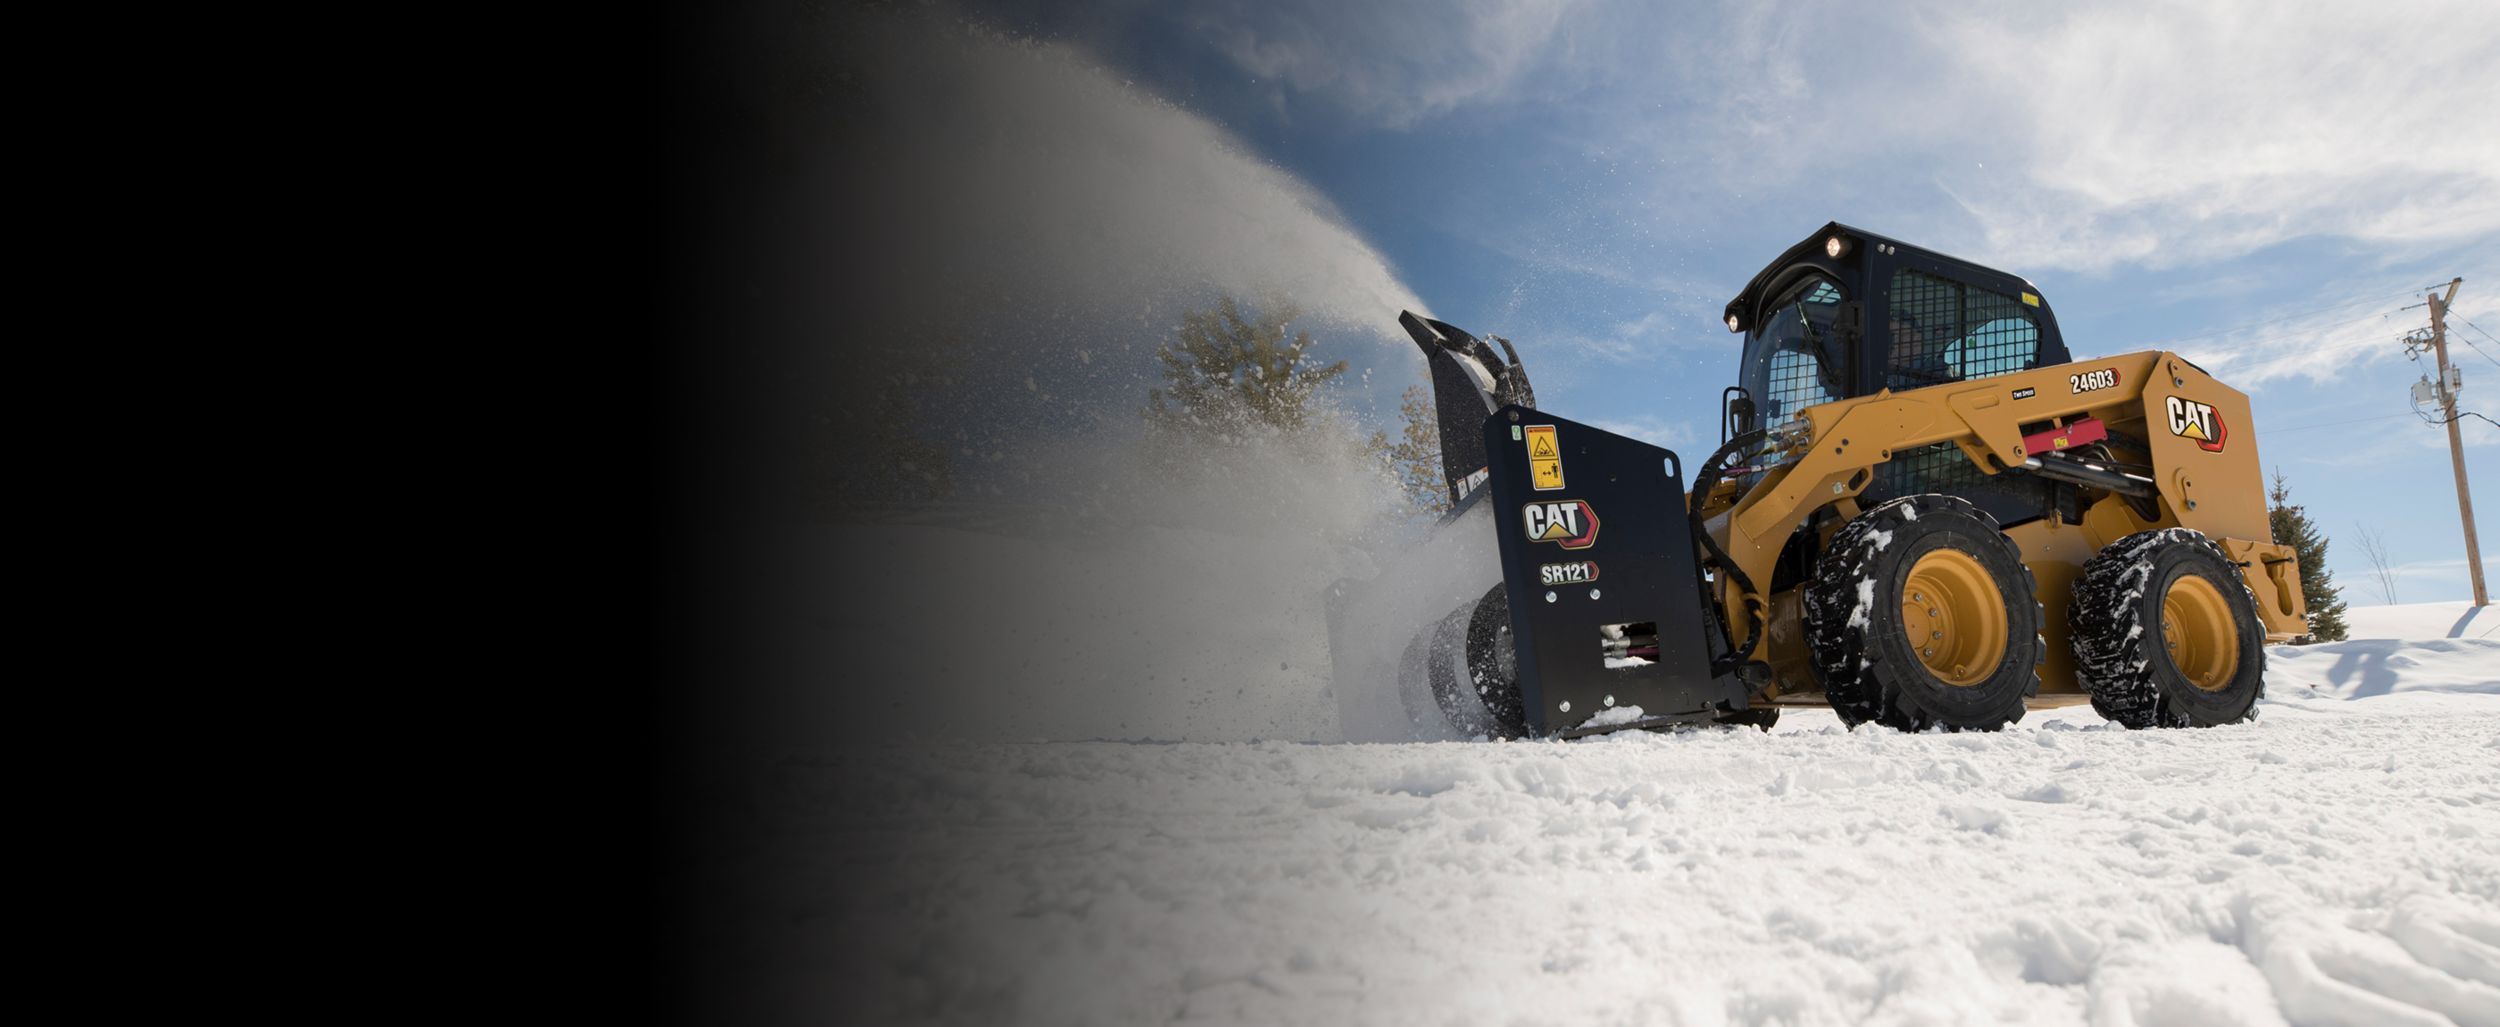 Rental Equipment for Snow and Ice Removal